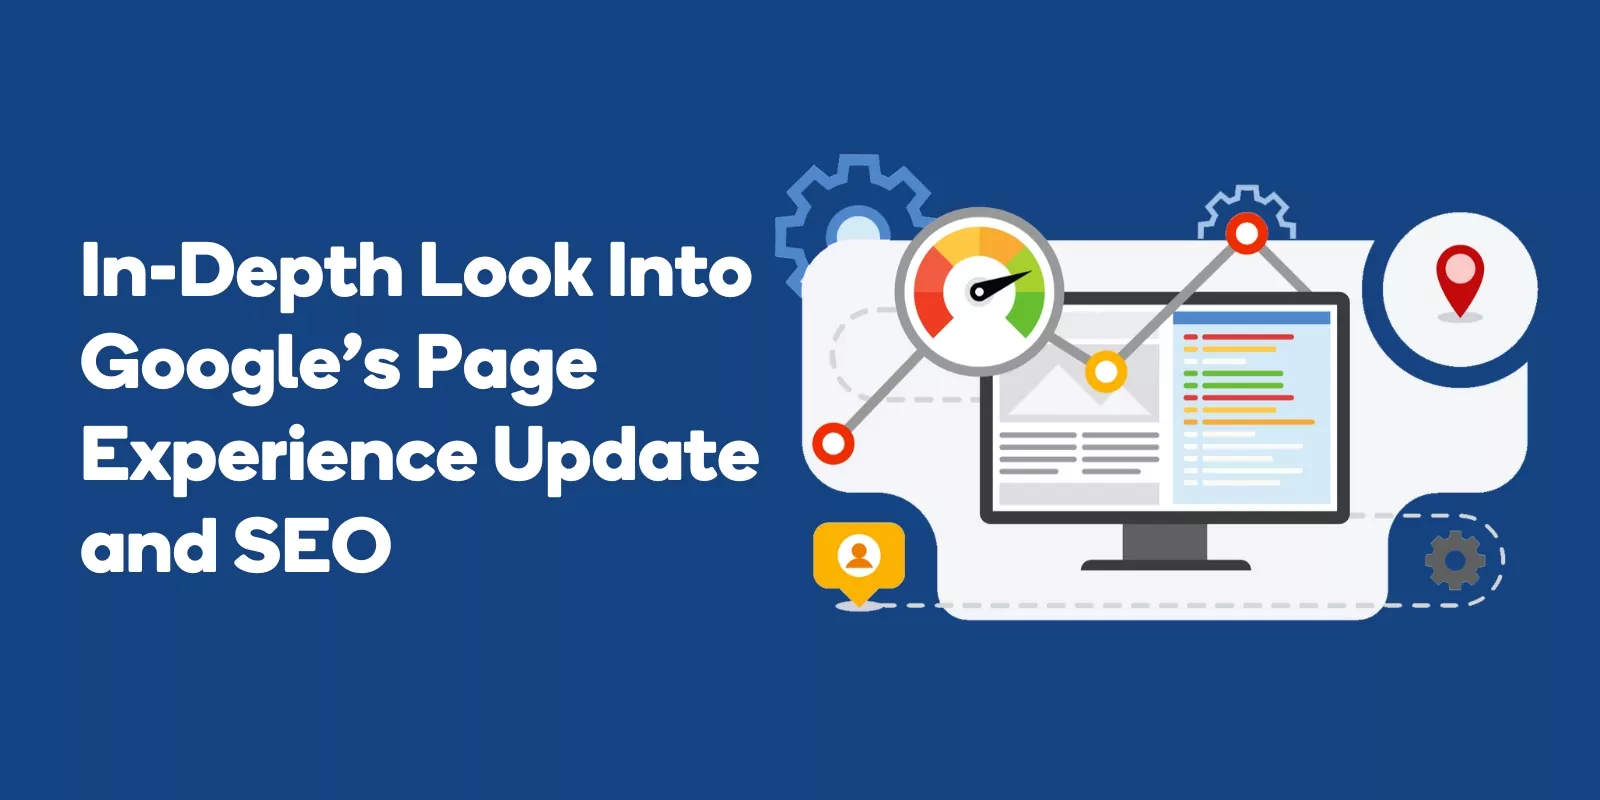 Google's Page Experience Update and SEO